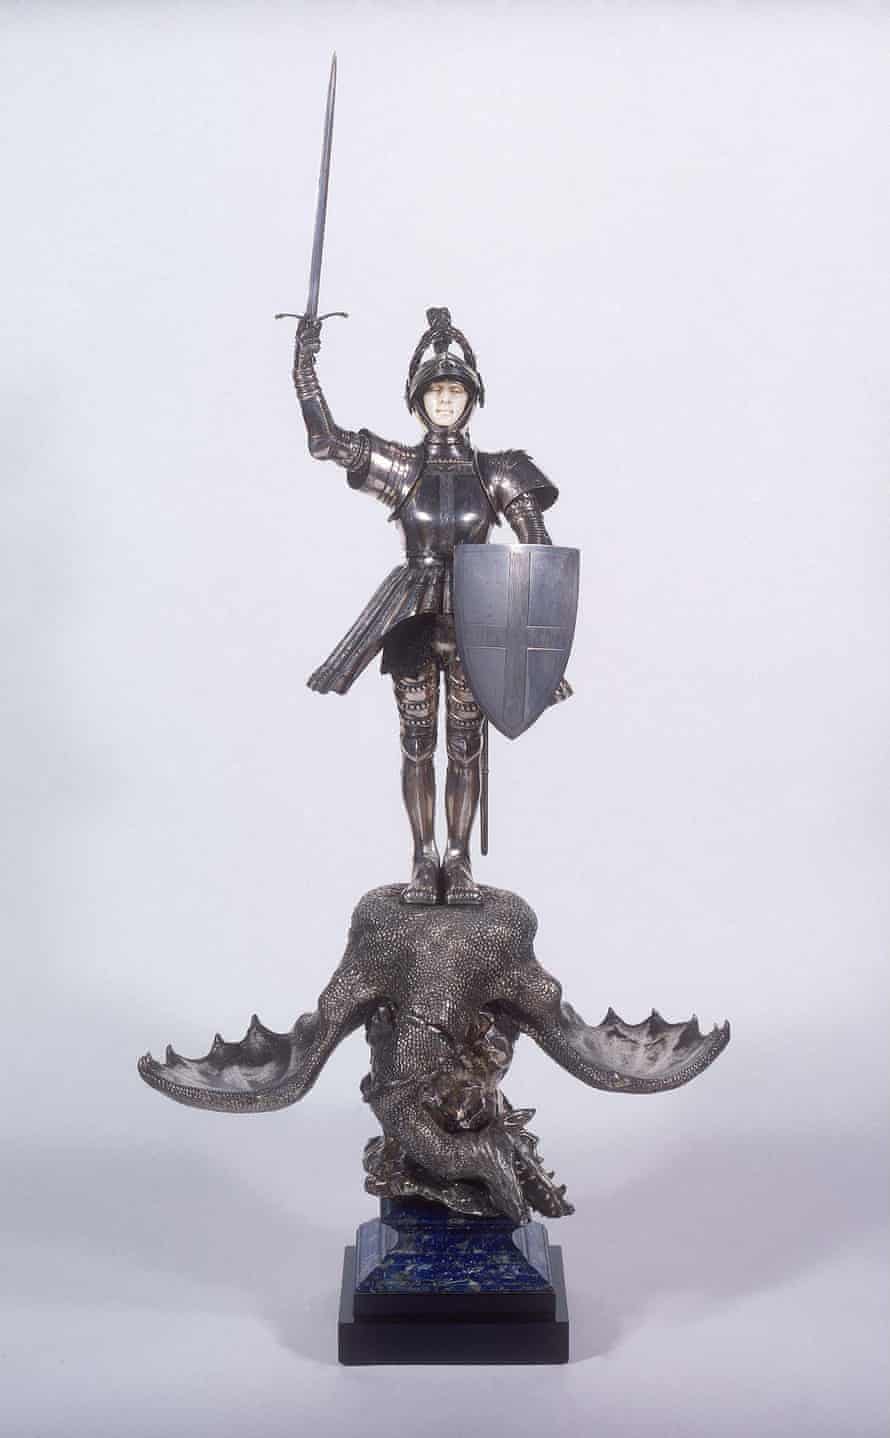 Edward Onslow Ford's St George and the Dragon Salt Cellar, 1901Silver, marble, ivory, and lapis lazuli